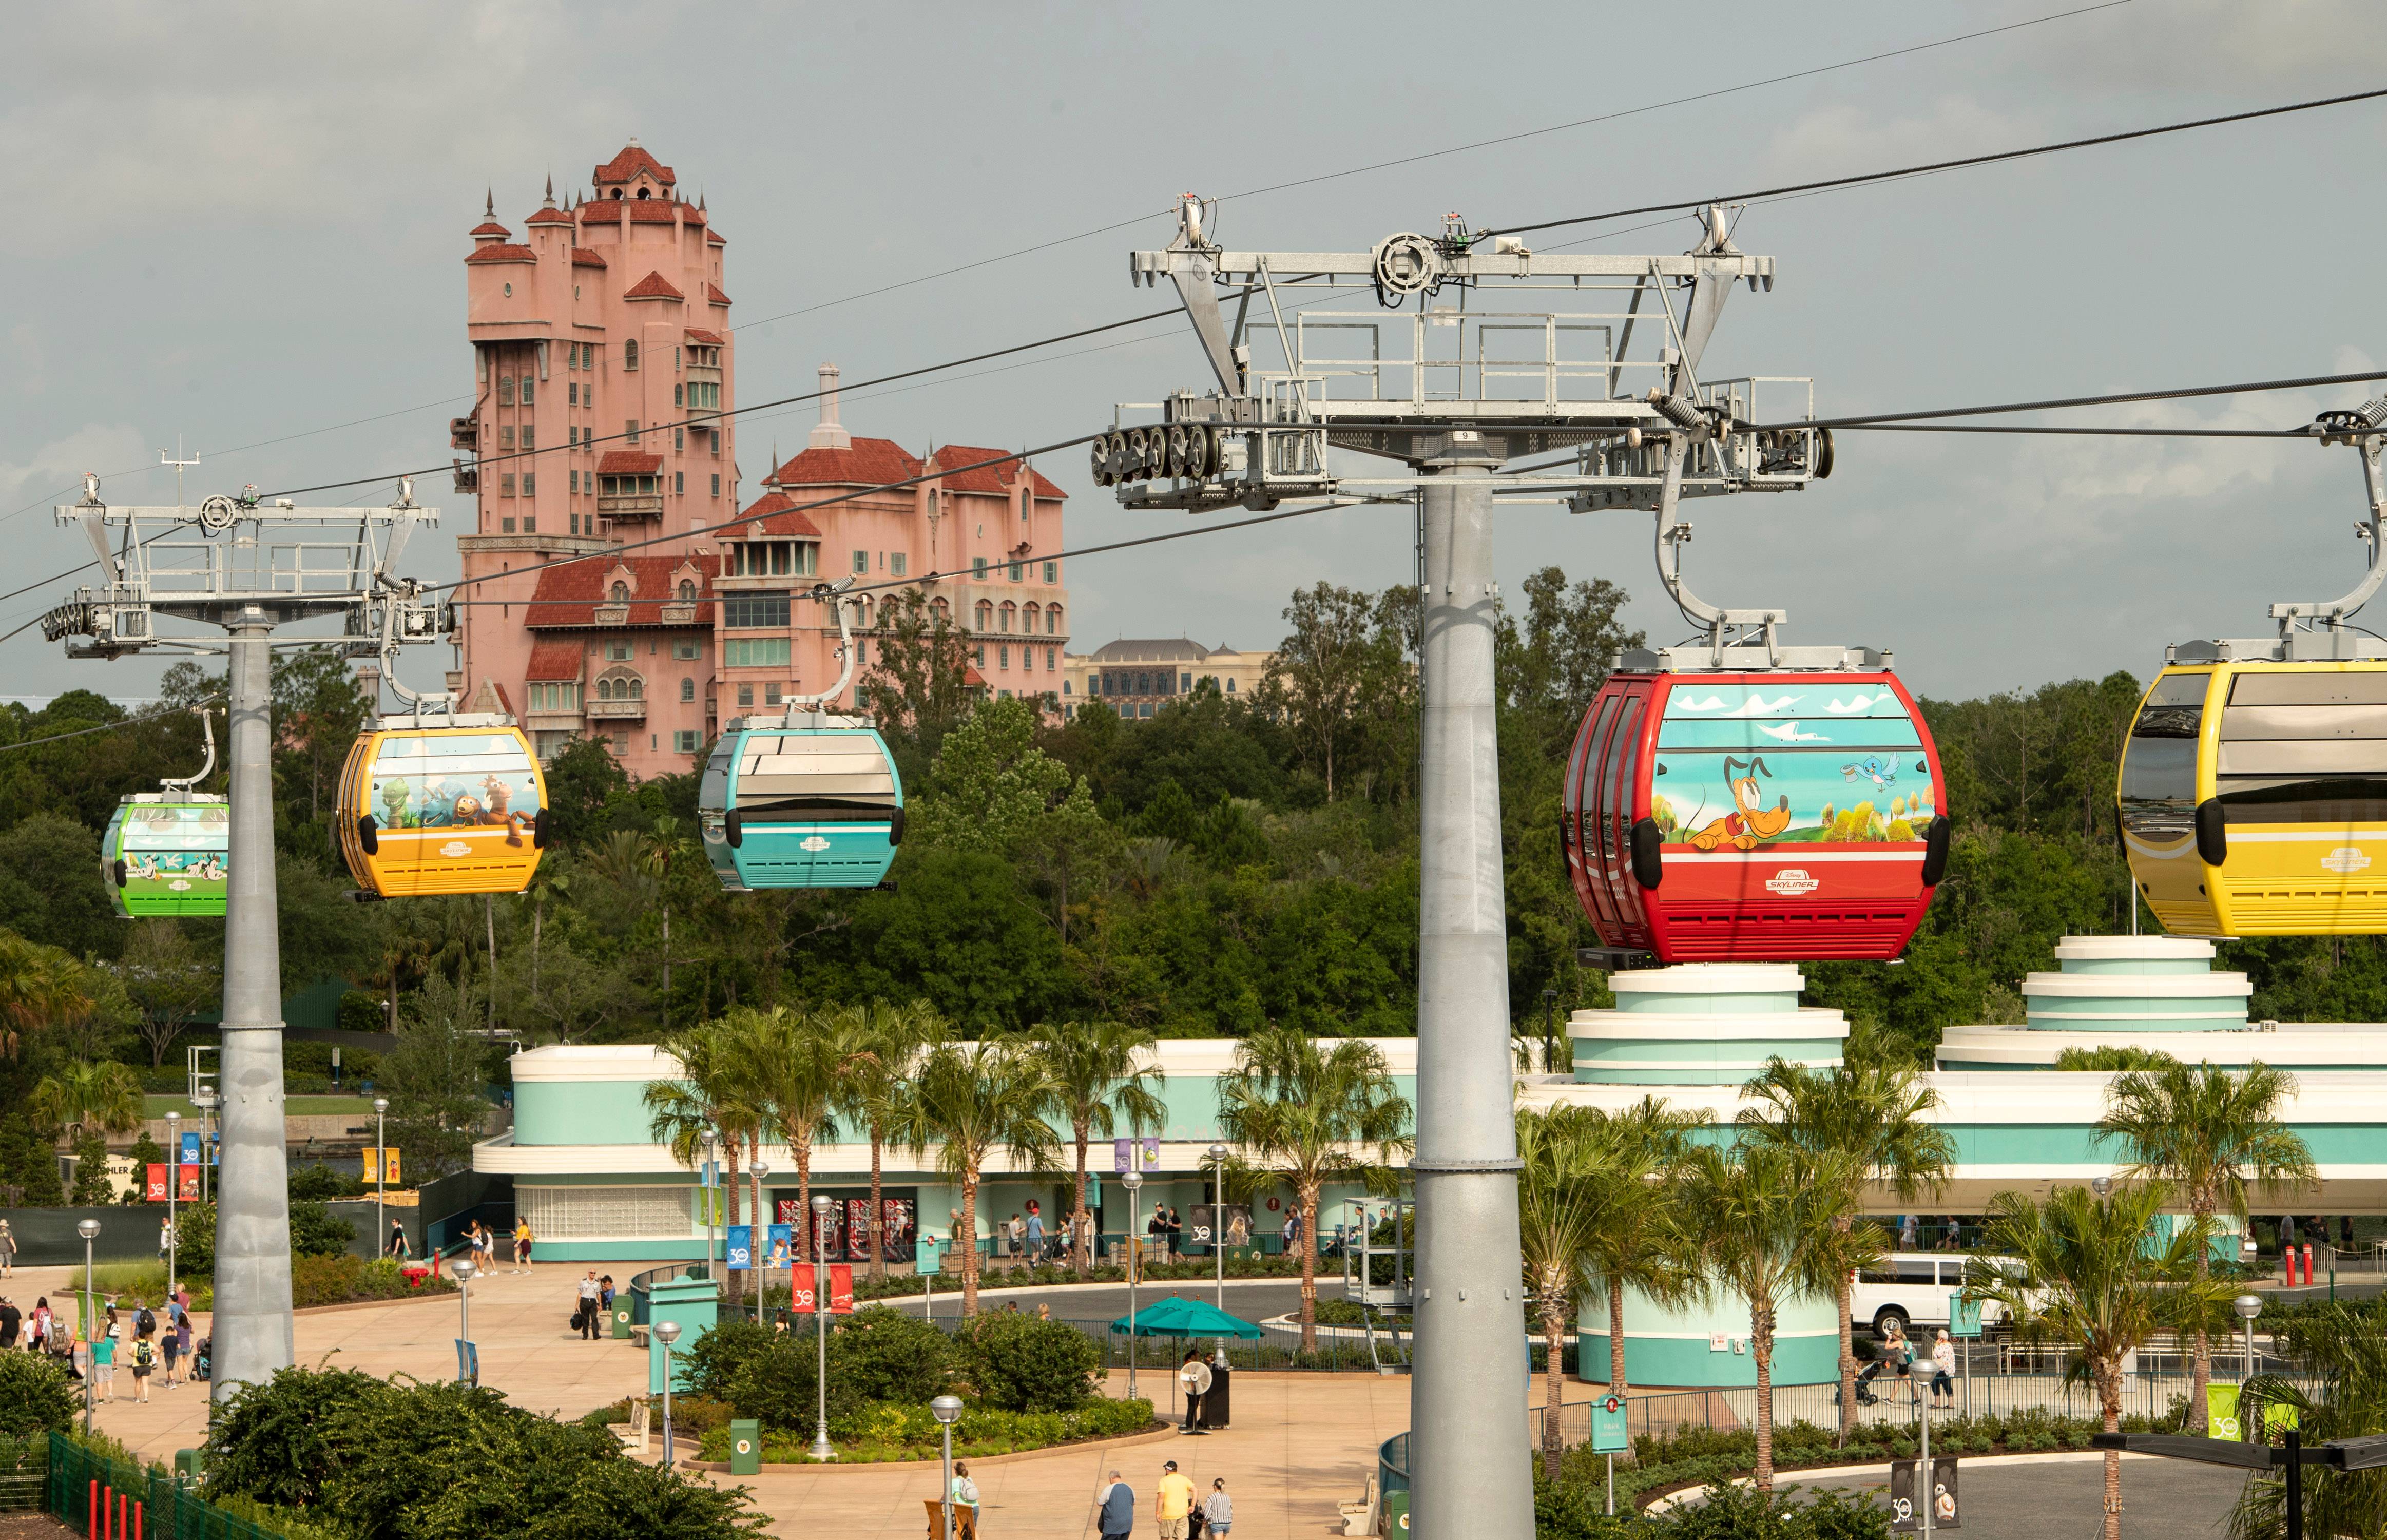 Cast Members from Disney's Hollywood Studios will be among the first to ride Disney Skyliner